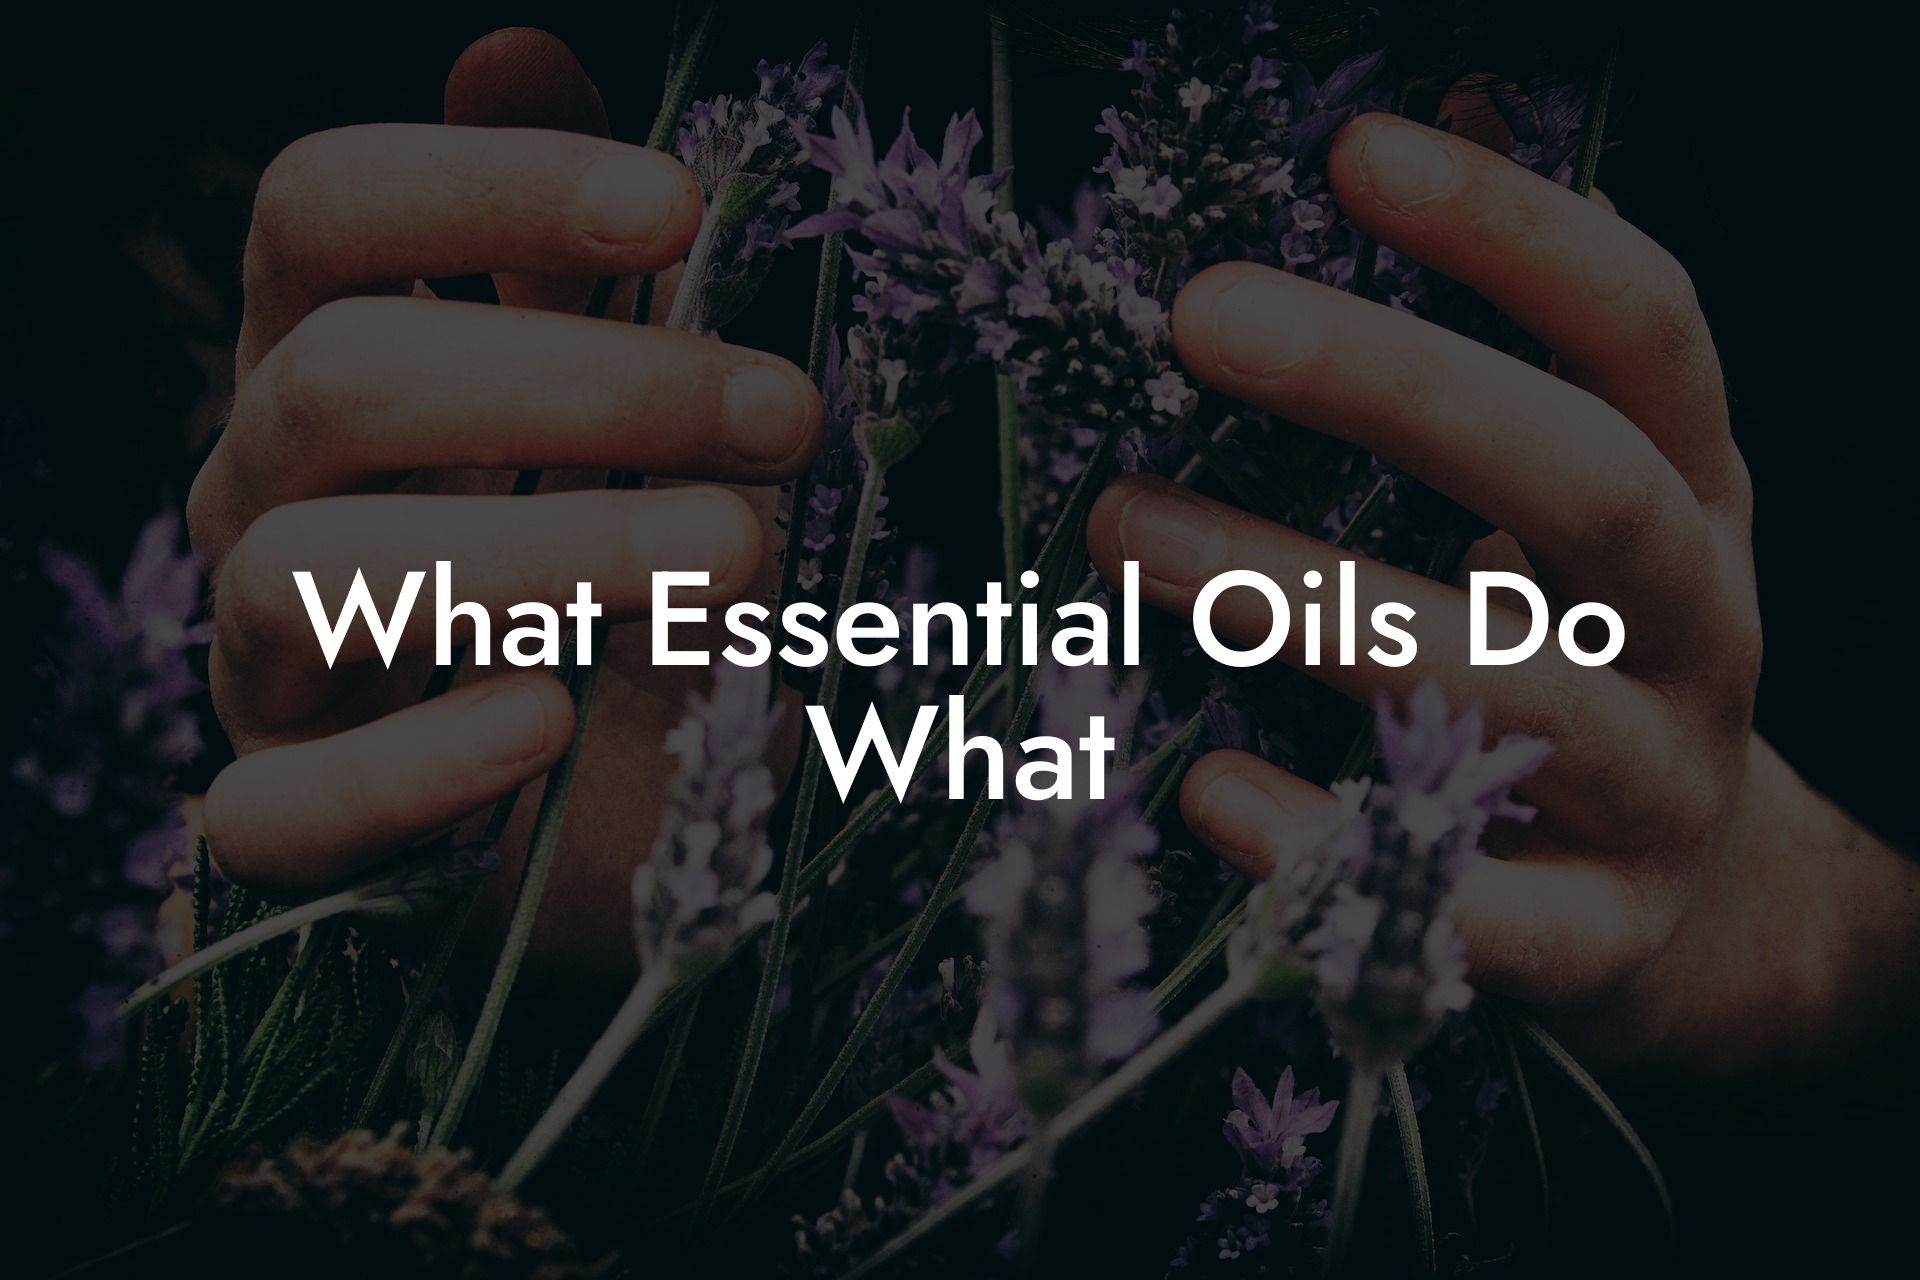 What Essential Oils Do What